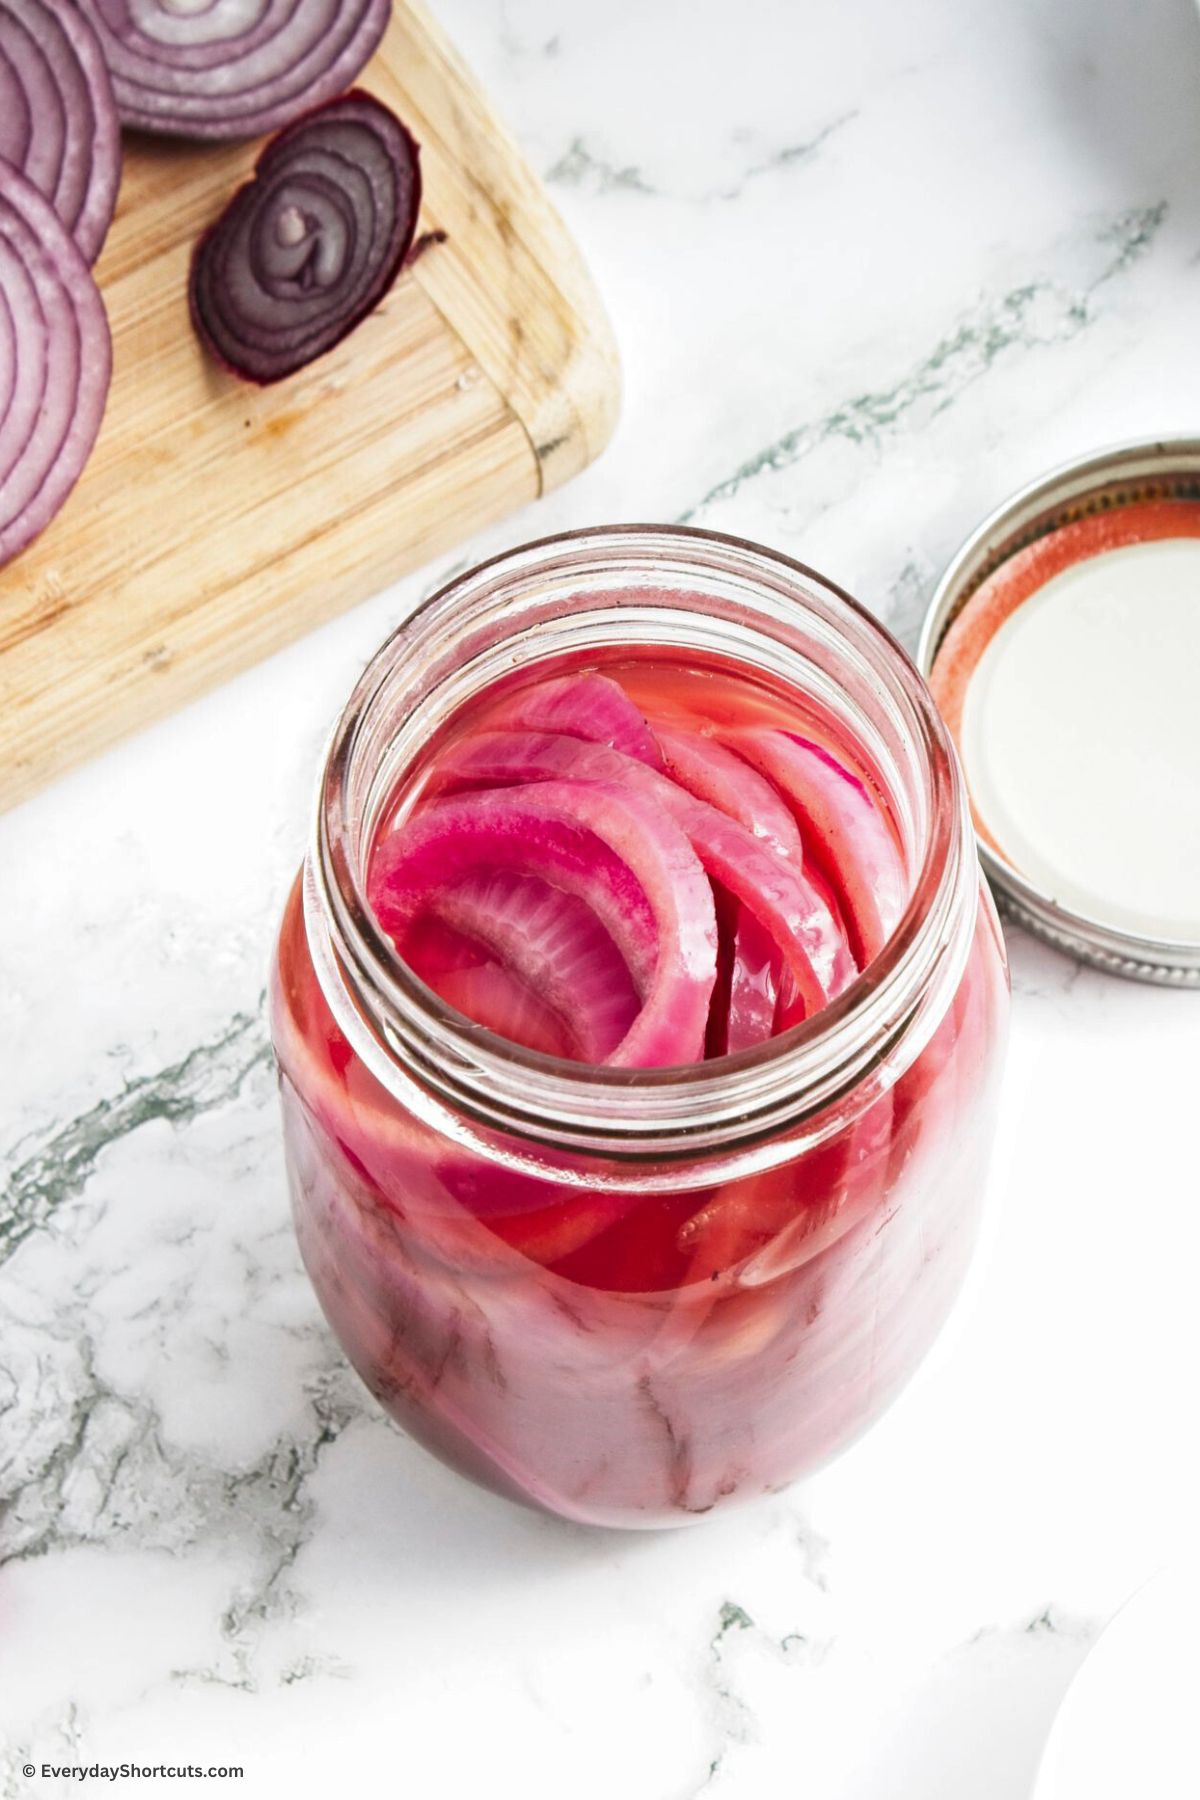 onions marinated with pickling mixture in a jar